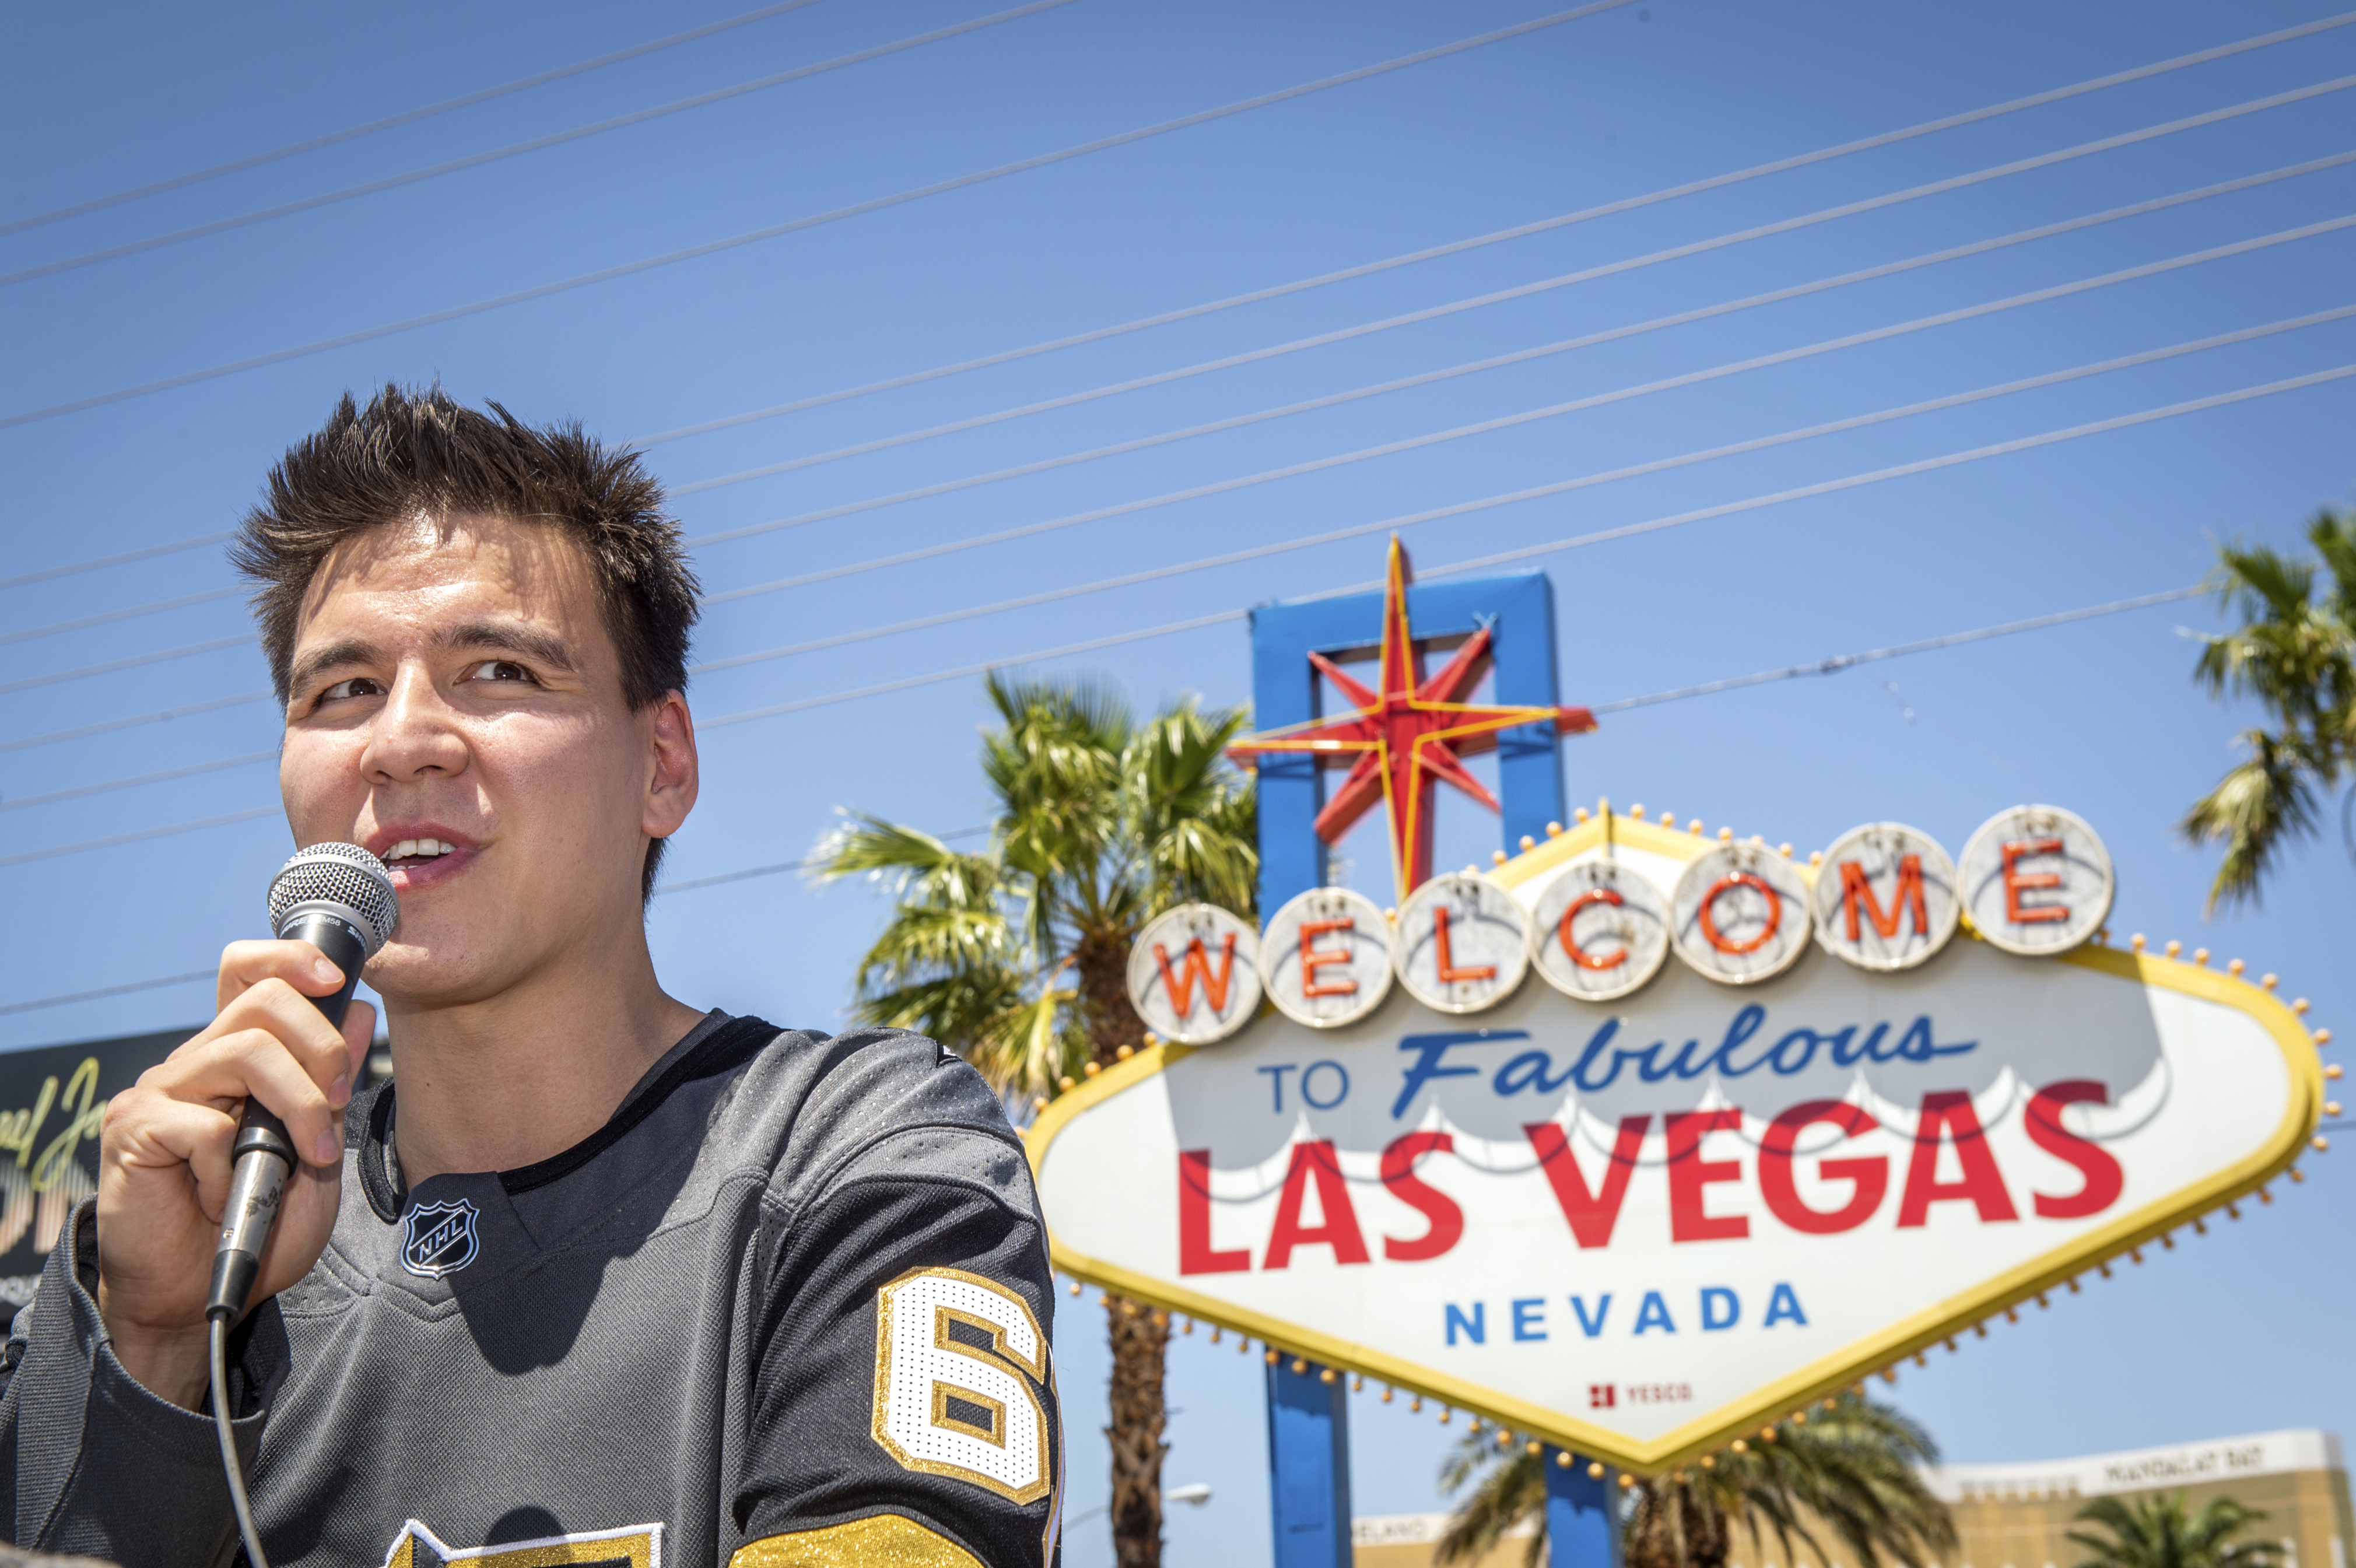 "Jeopardy!" sensation James Holzhauer speaks after being presented with a key to the Las Vegas Strip in front of the Welcome to Fabulous Las Vegas sign in Las Vegas, Thursday, May 2, 2019. Holzhauer winnings have hit $2 million. (Caroline Brehman—Las Vegas Review-Journal/AP)